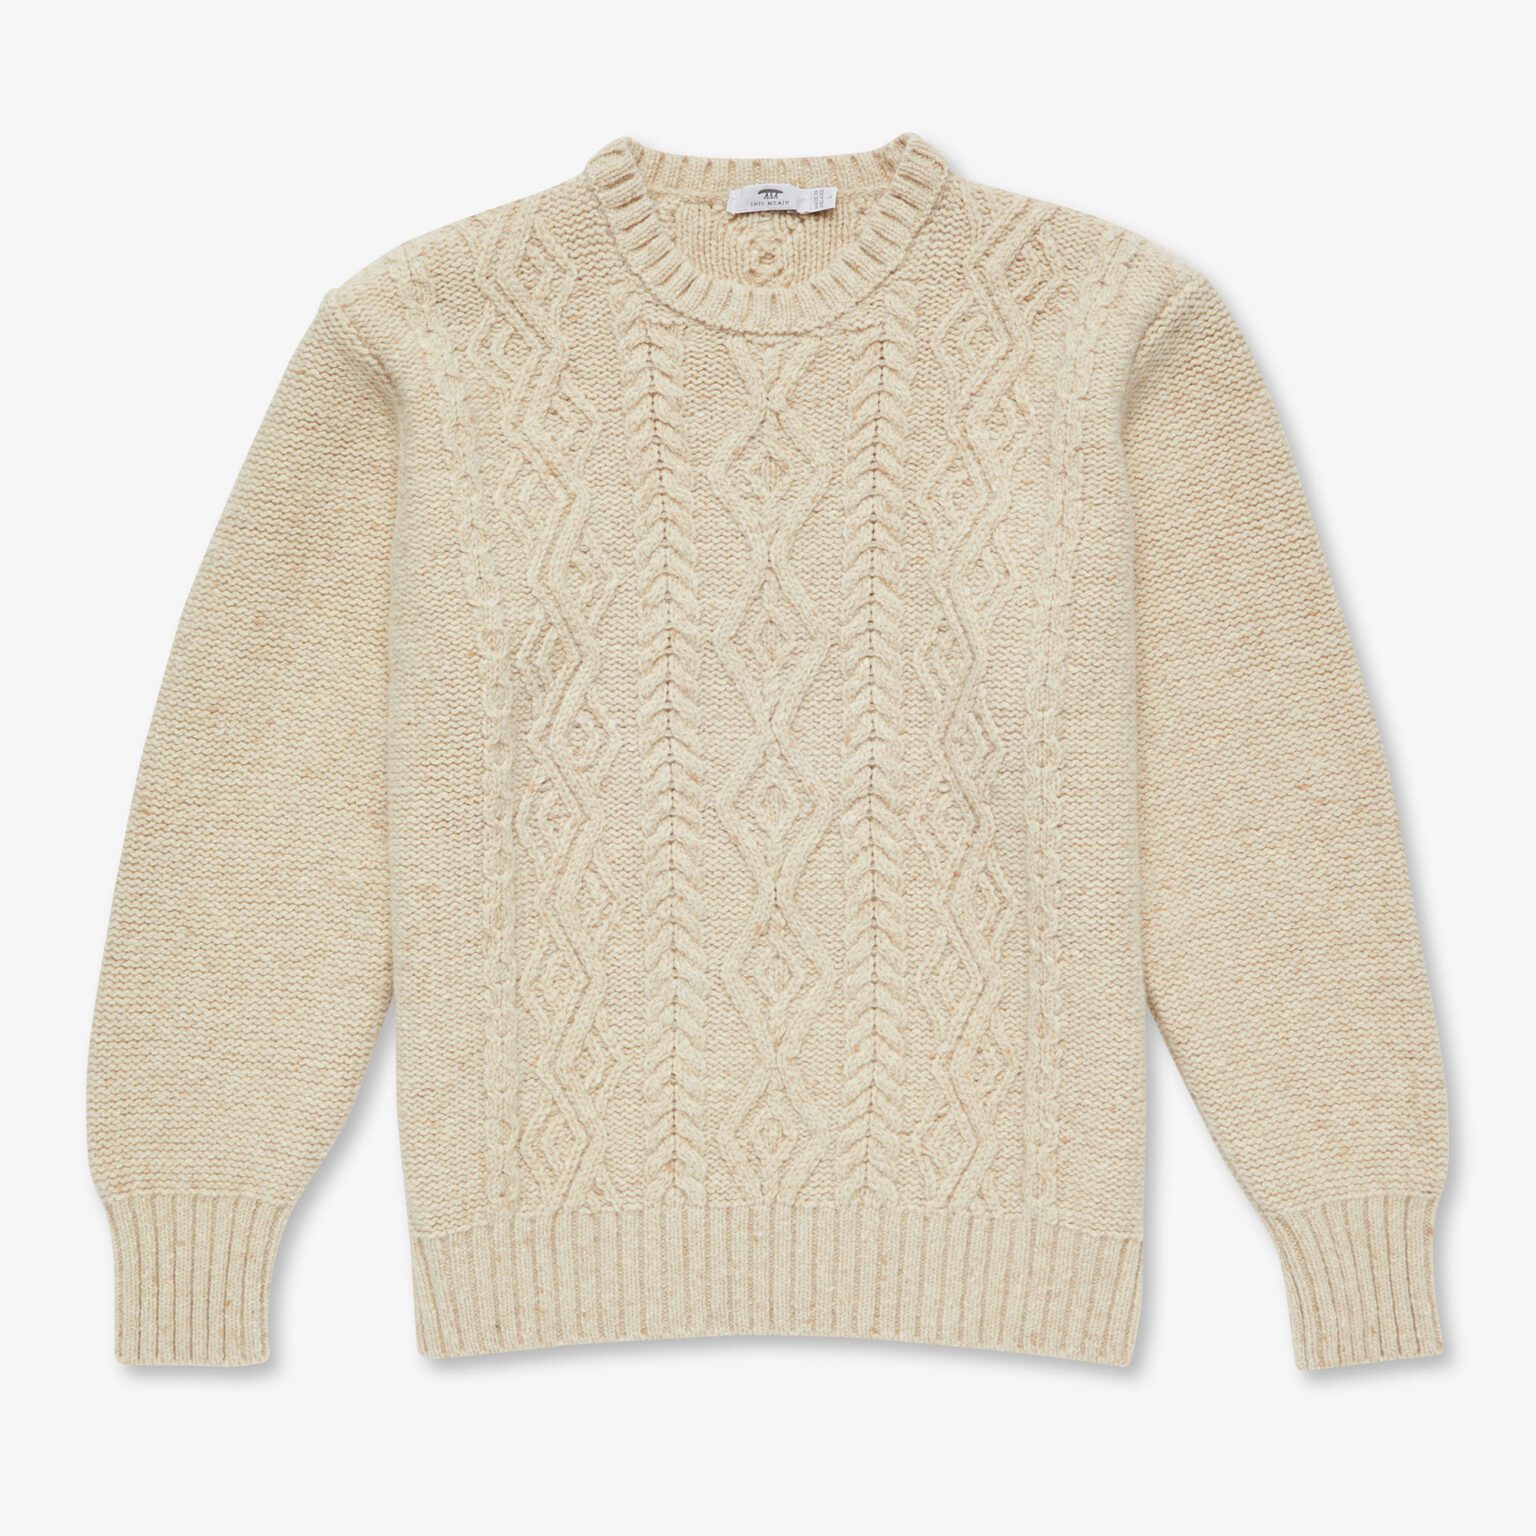 Men's Knitted Aran Cashmere Sweater - Inis Meáin Knitting Co.